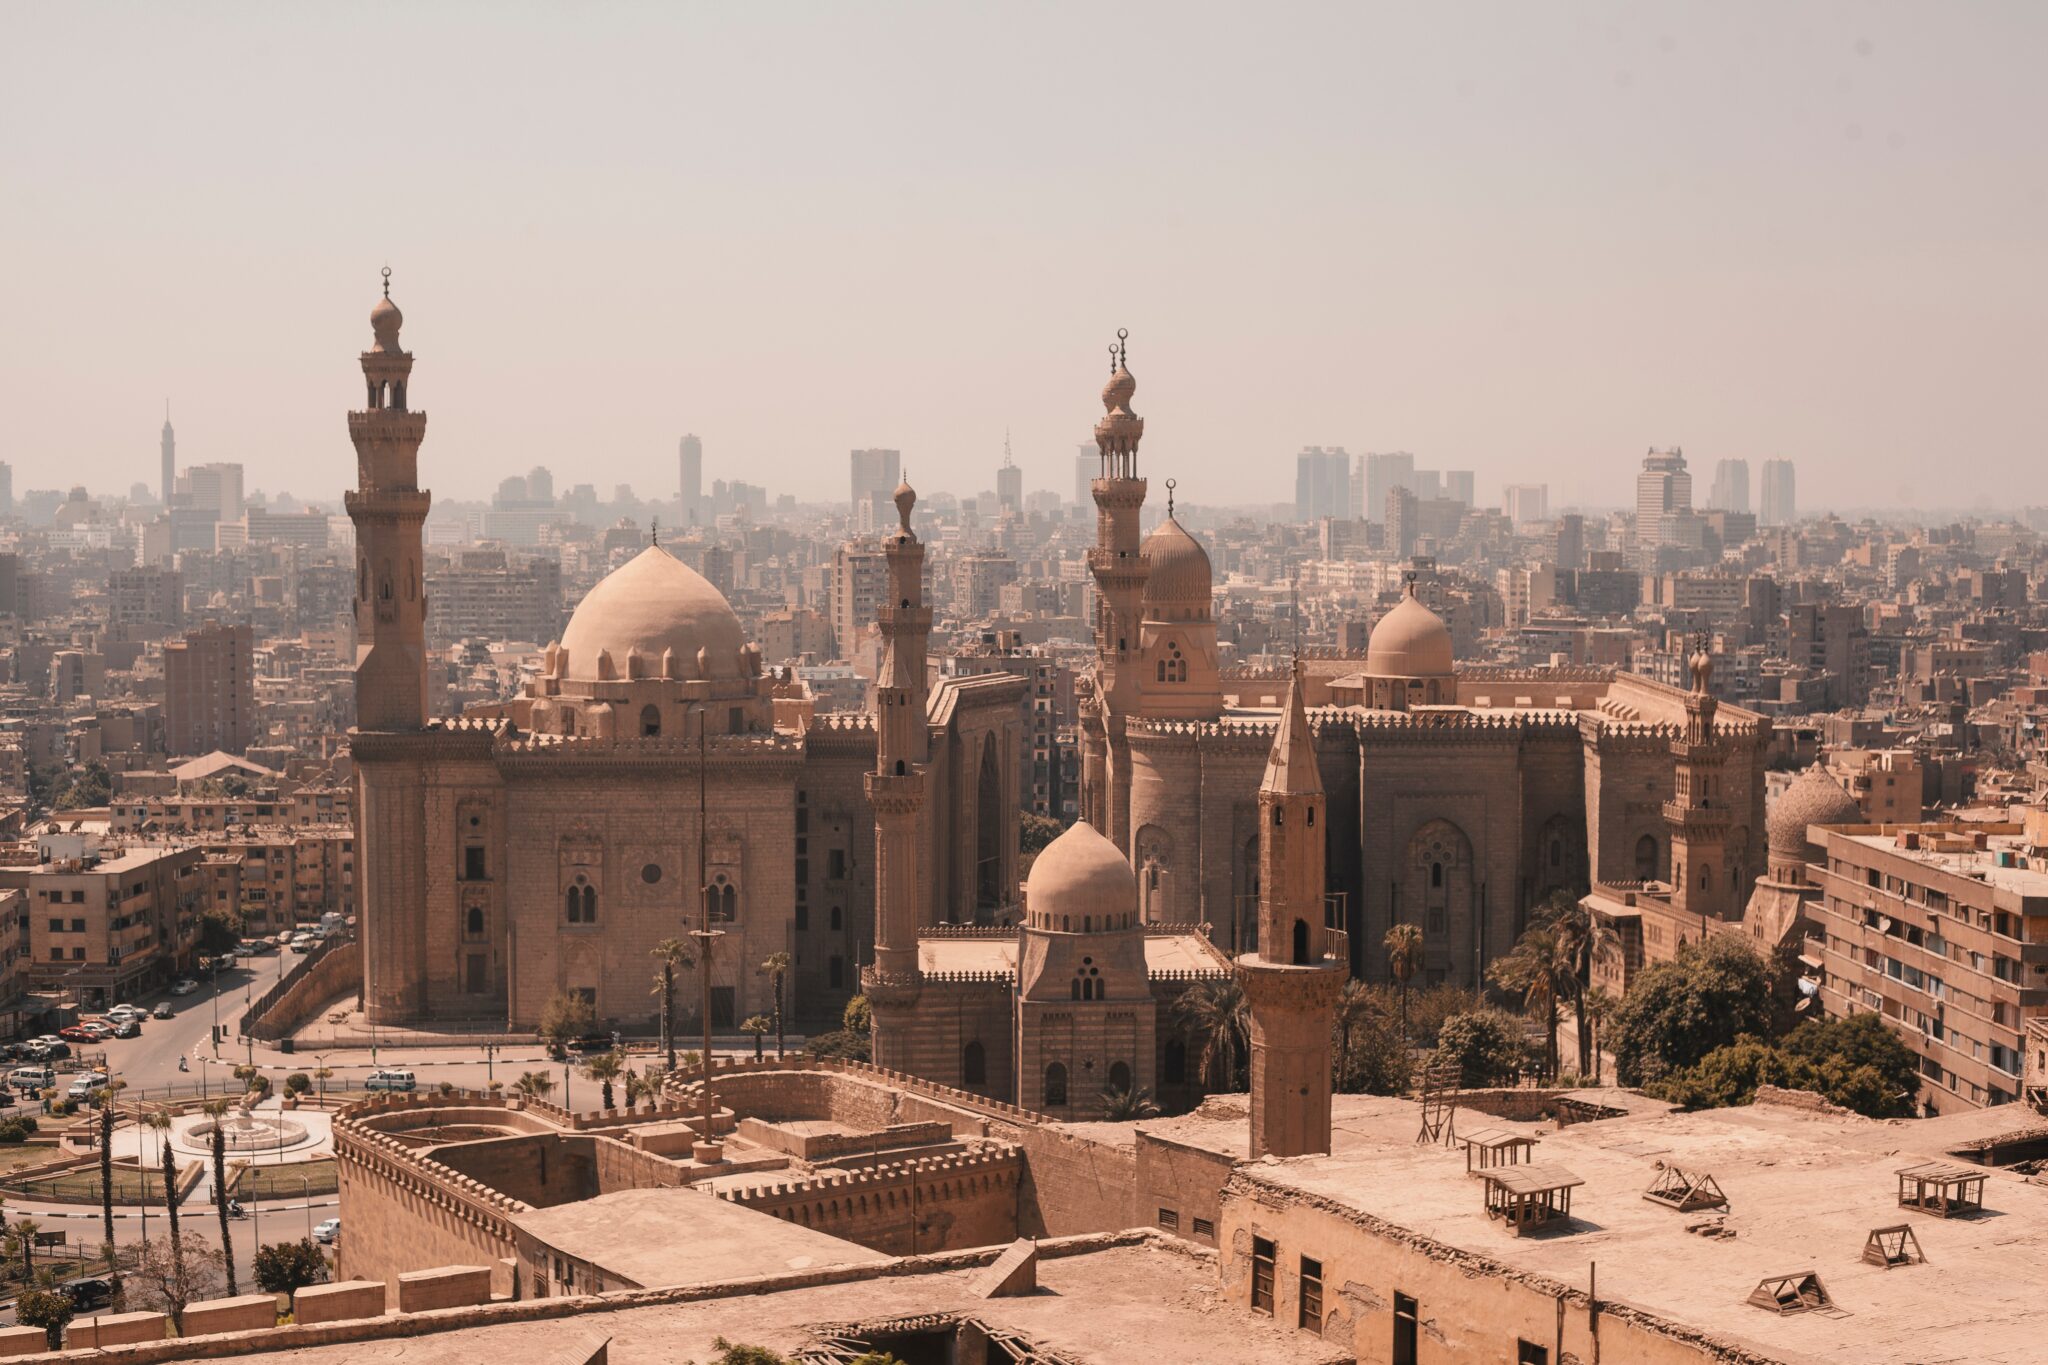 An overview of a middle eastern city